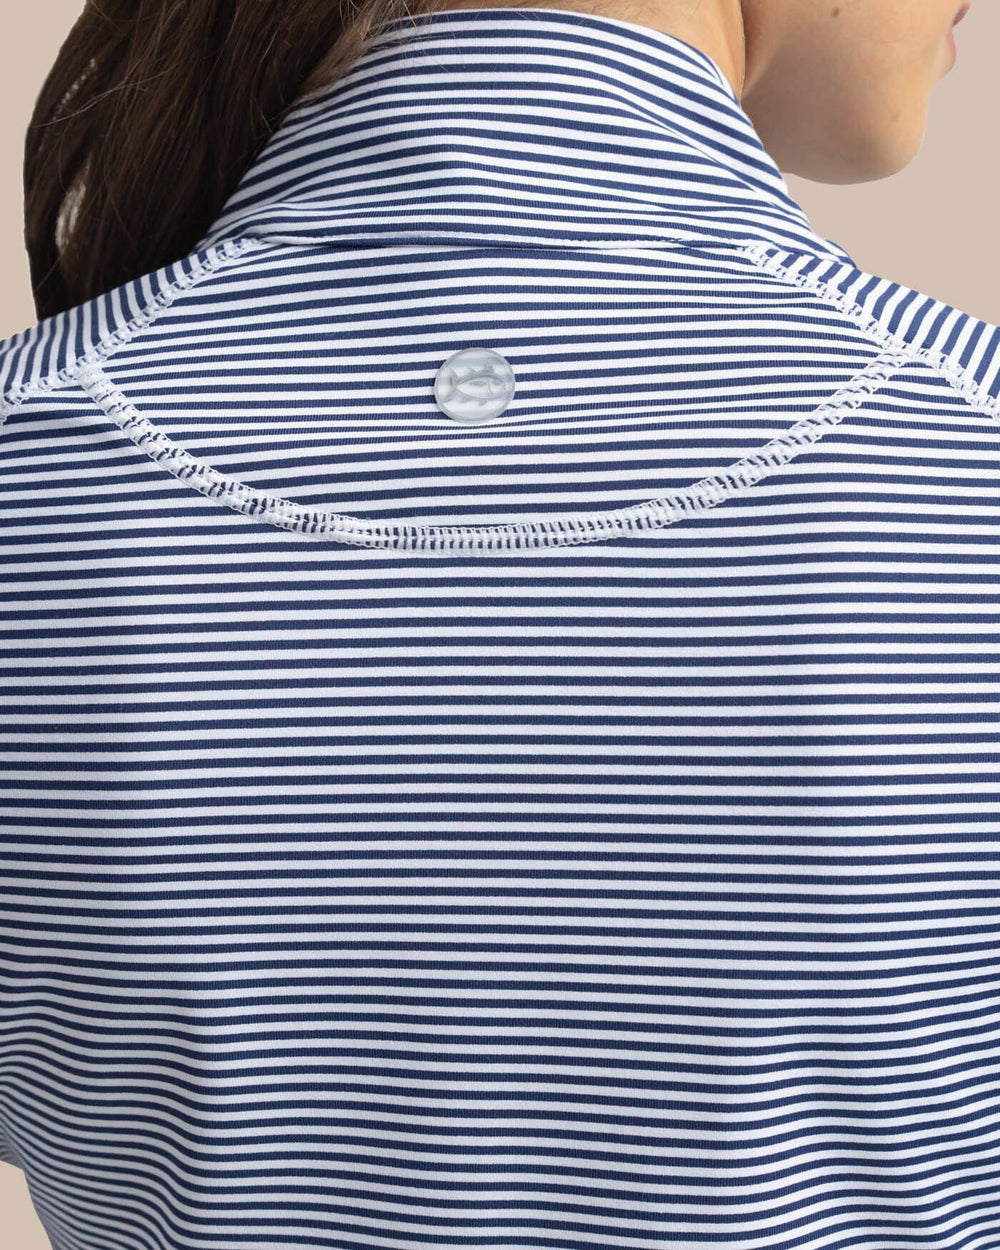 The yoke view of the Southern Tide Team Colors Runaround Quarter Zip Pull Over by Southern Tide - Nautical Navy